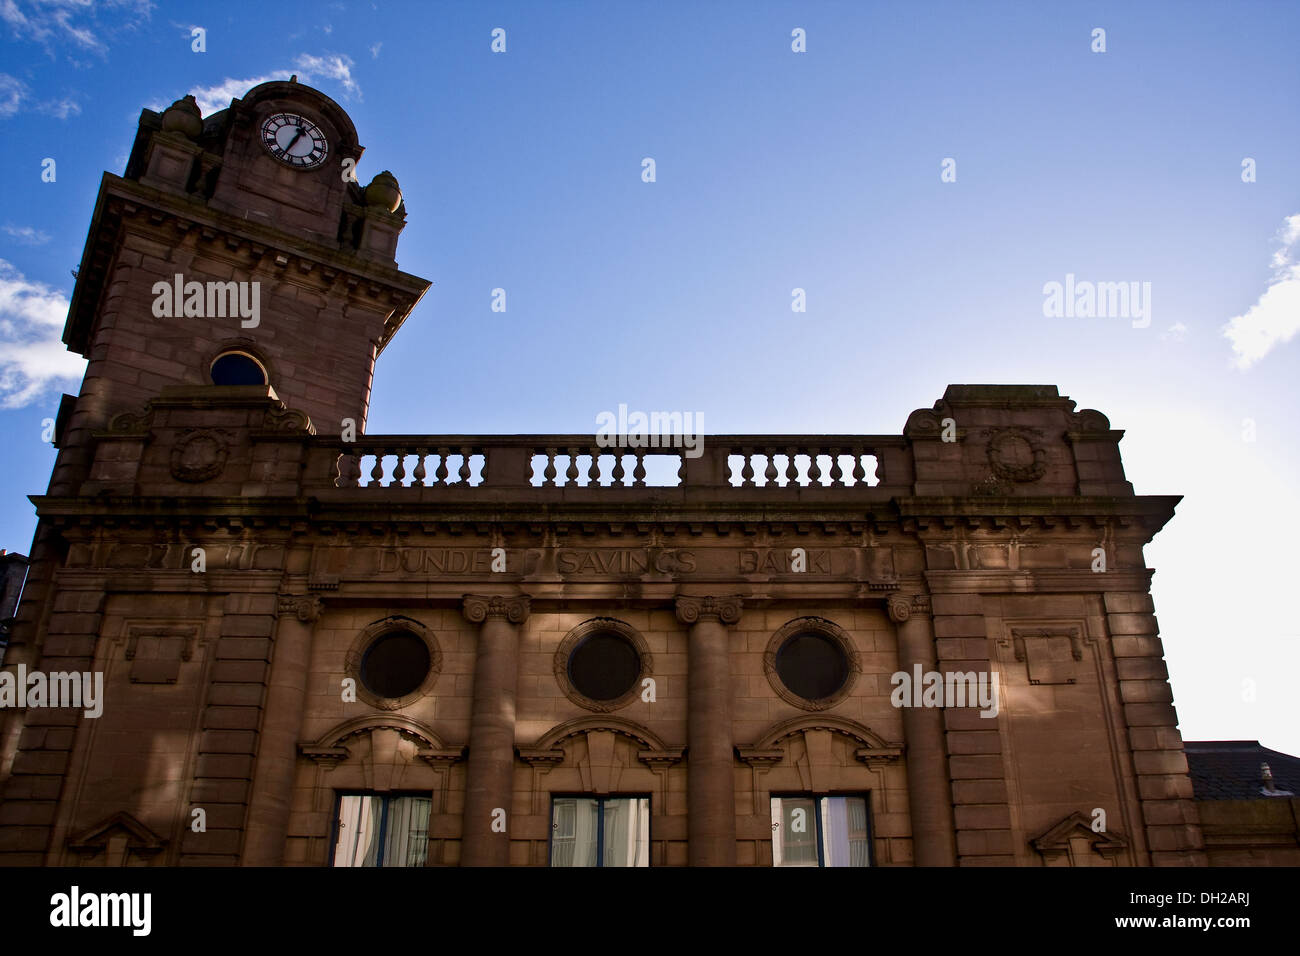 Dundee Savings Bank Built by David Baxter in 1914 in a heavy Edwardian Baroque building with oversize clock tower, UK Stock Photo